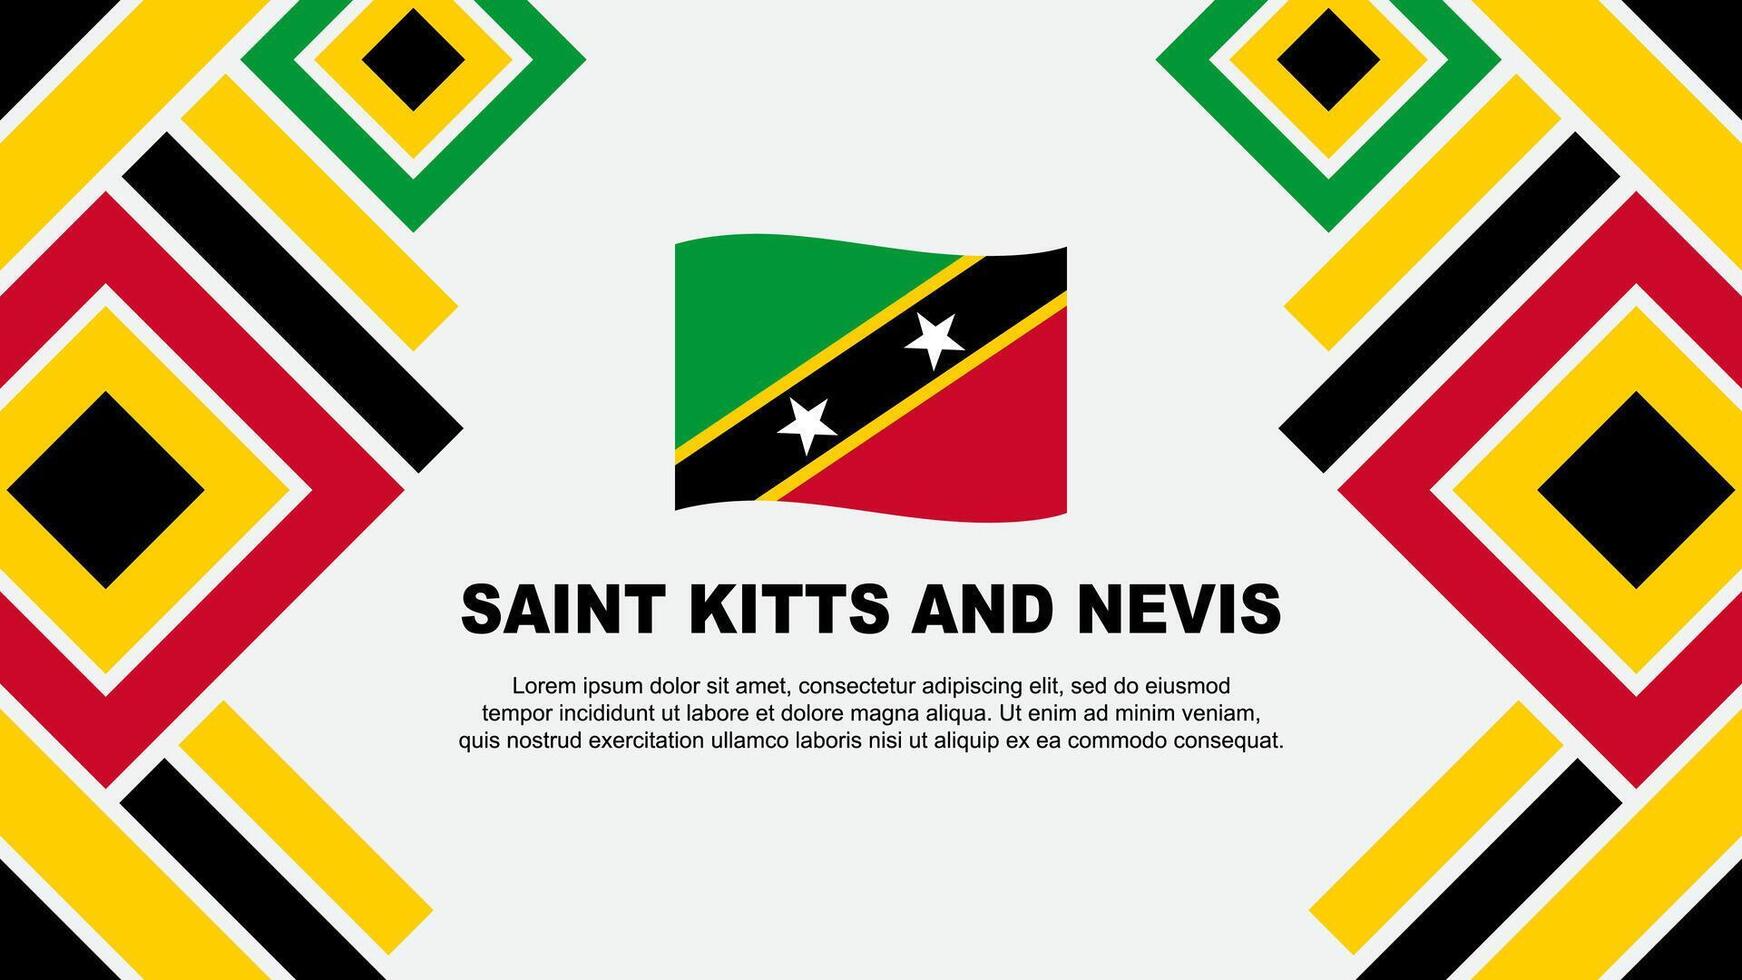 Saint Kitts And Nevis Flag Abstract Background Design Template. Saint Kitts And Nevis Independence Day Banner Wallpaper Vector Illustration